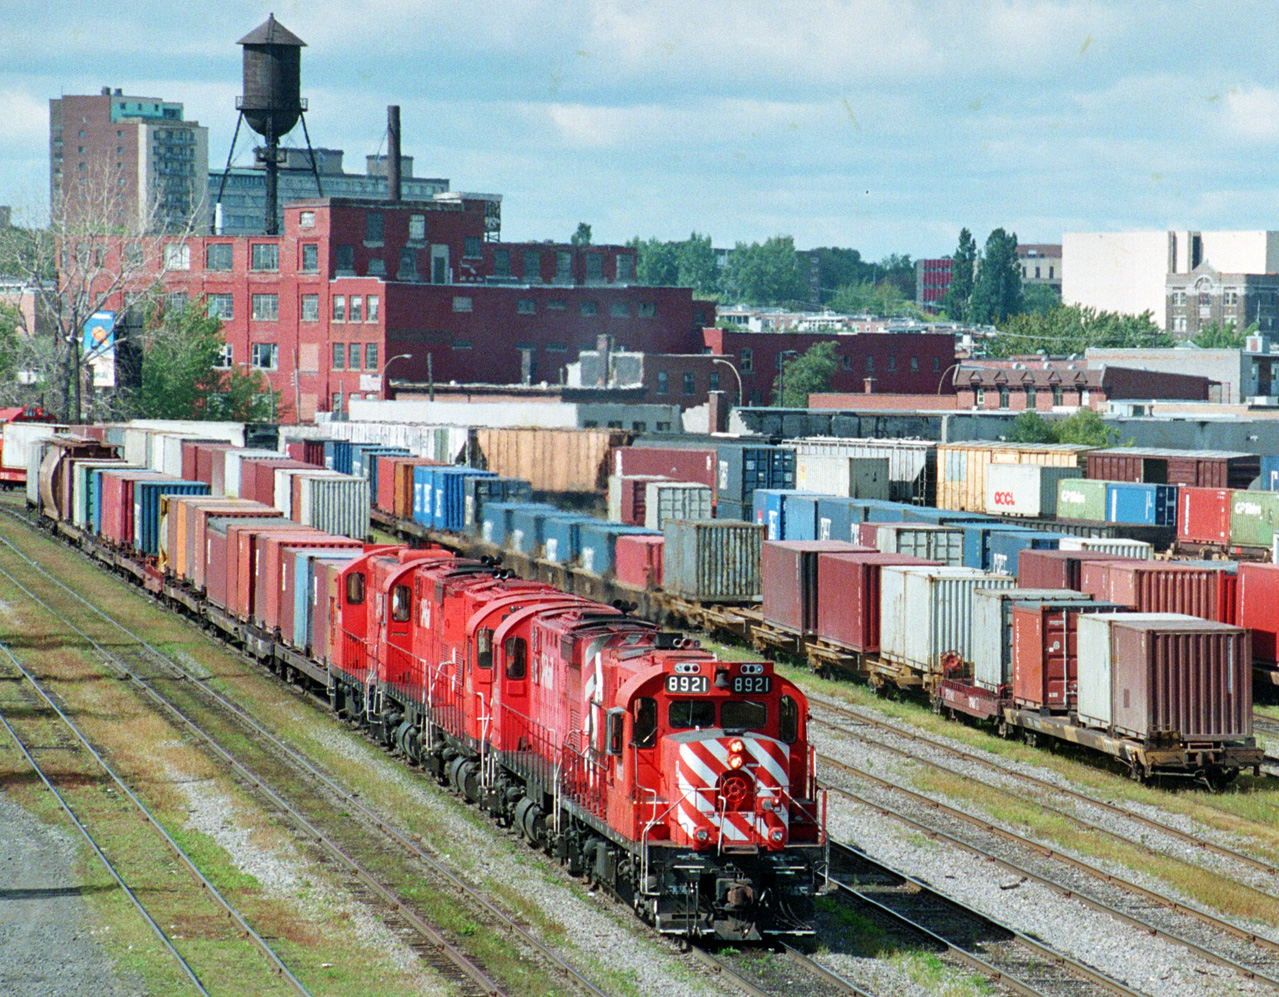 Heading through Hochelaga yard to the Port of Montreal, a transfer freight is led by CP 8921, the unique MLW RSD17.